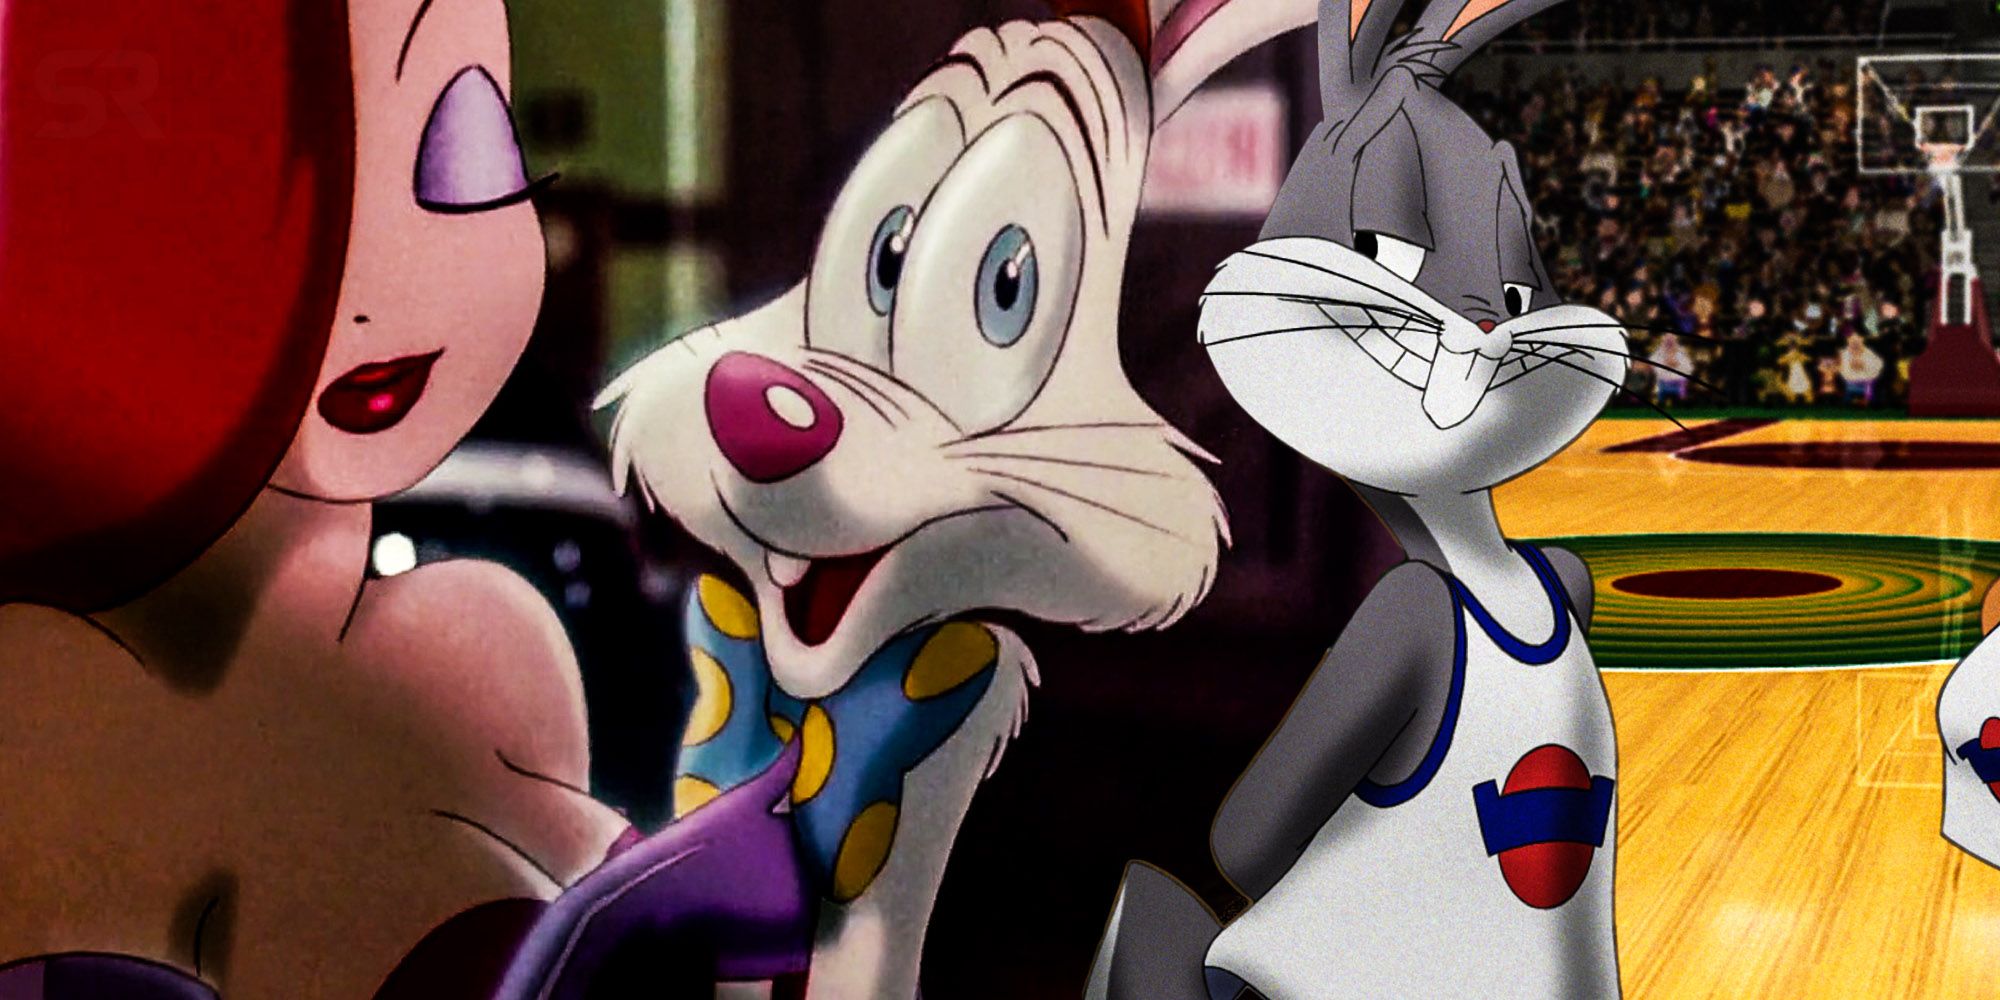 Unmade Roger Rabbit Prequel the toon platoon revealed Roger rabbit father bugs bunny